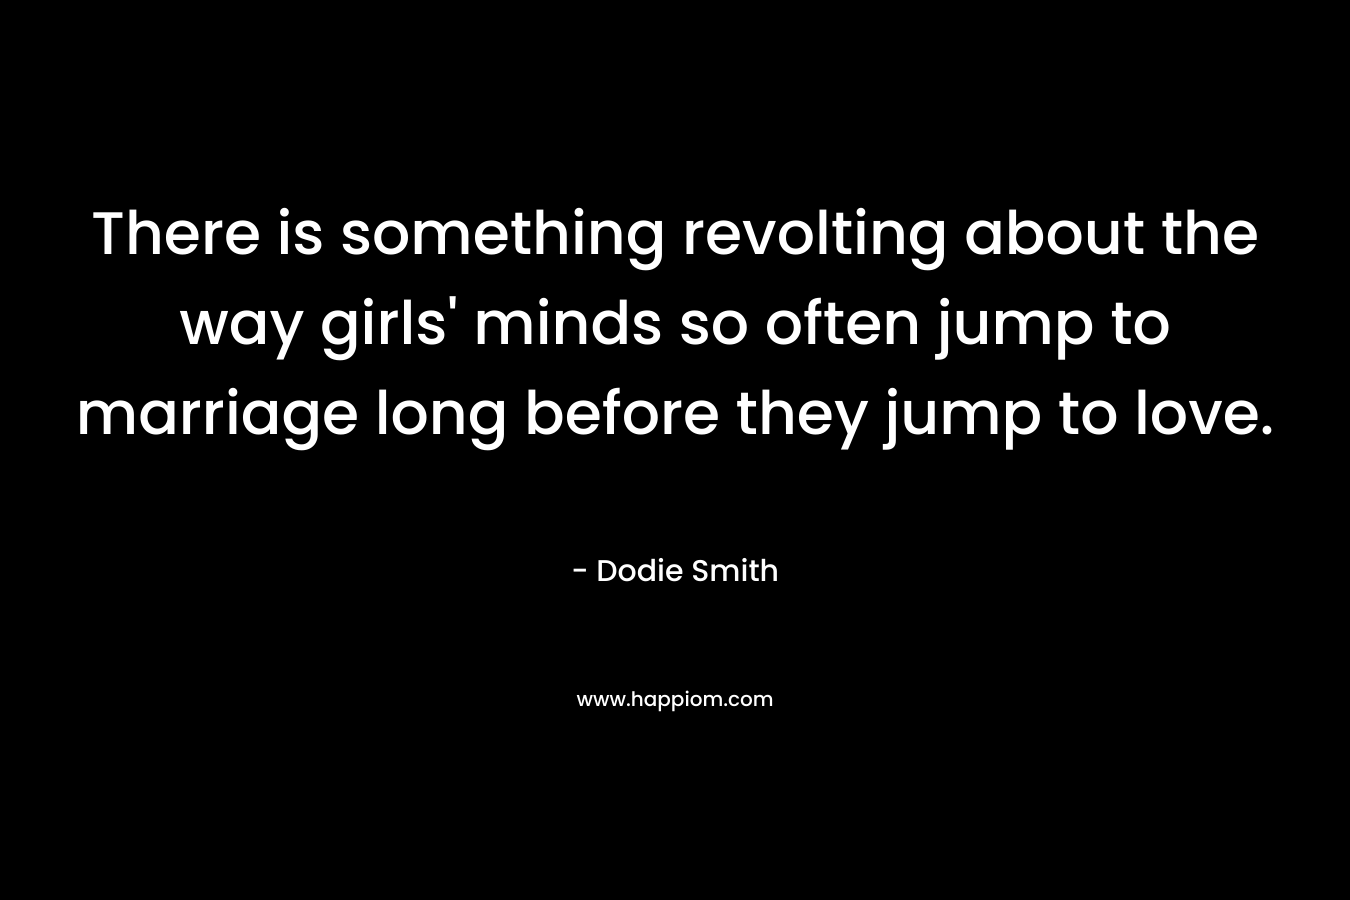 There is something revolting about the way girls’ minds so often jump to marriage long before they jump to love. – Dodie Smith